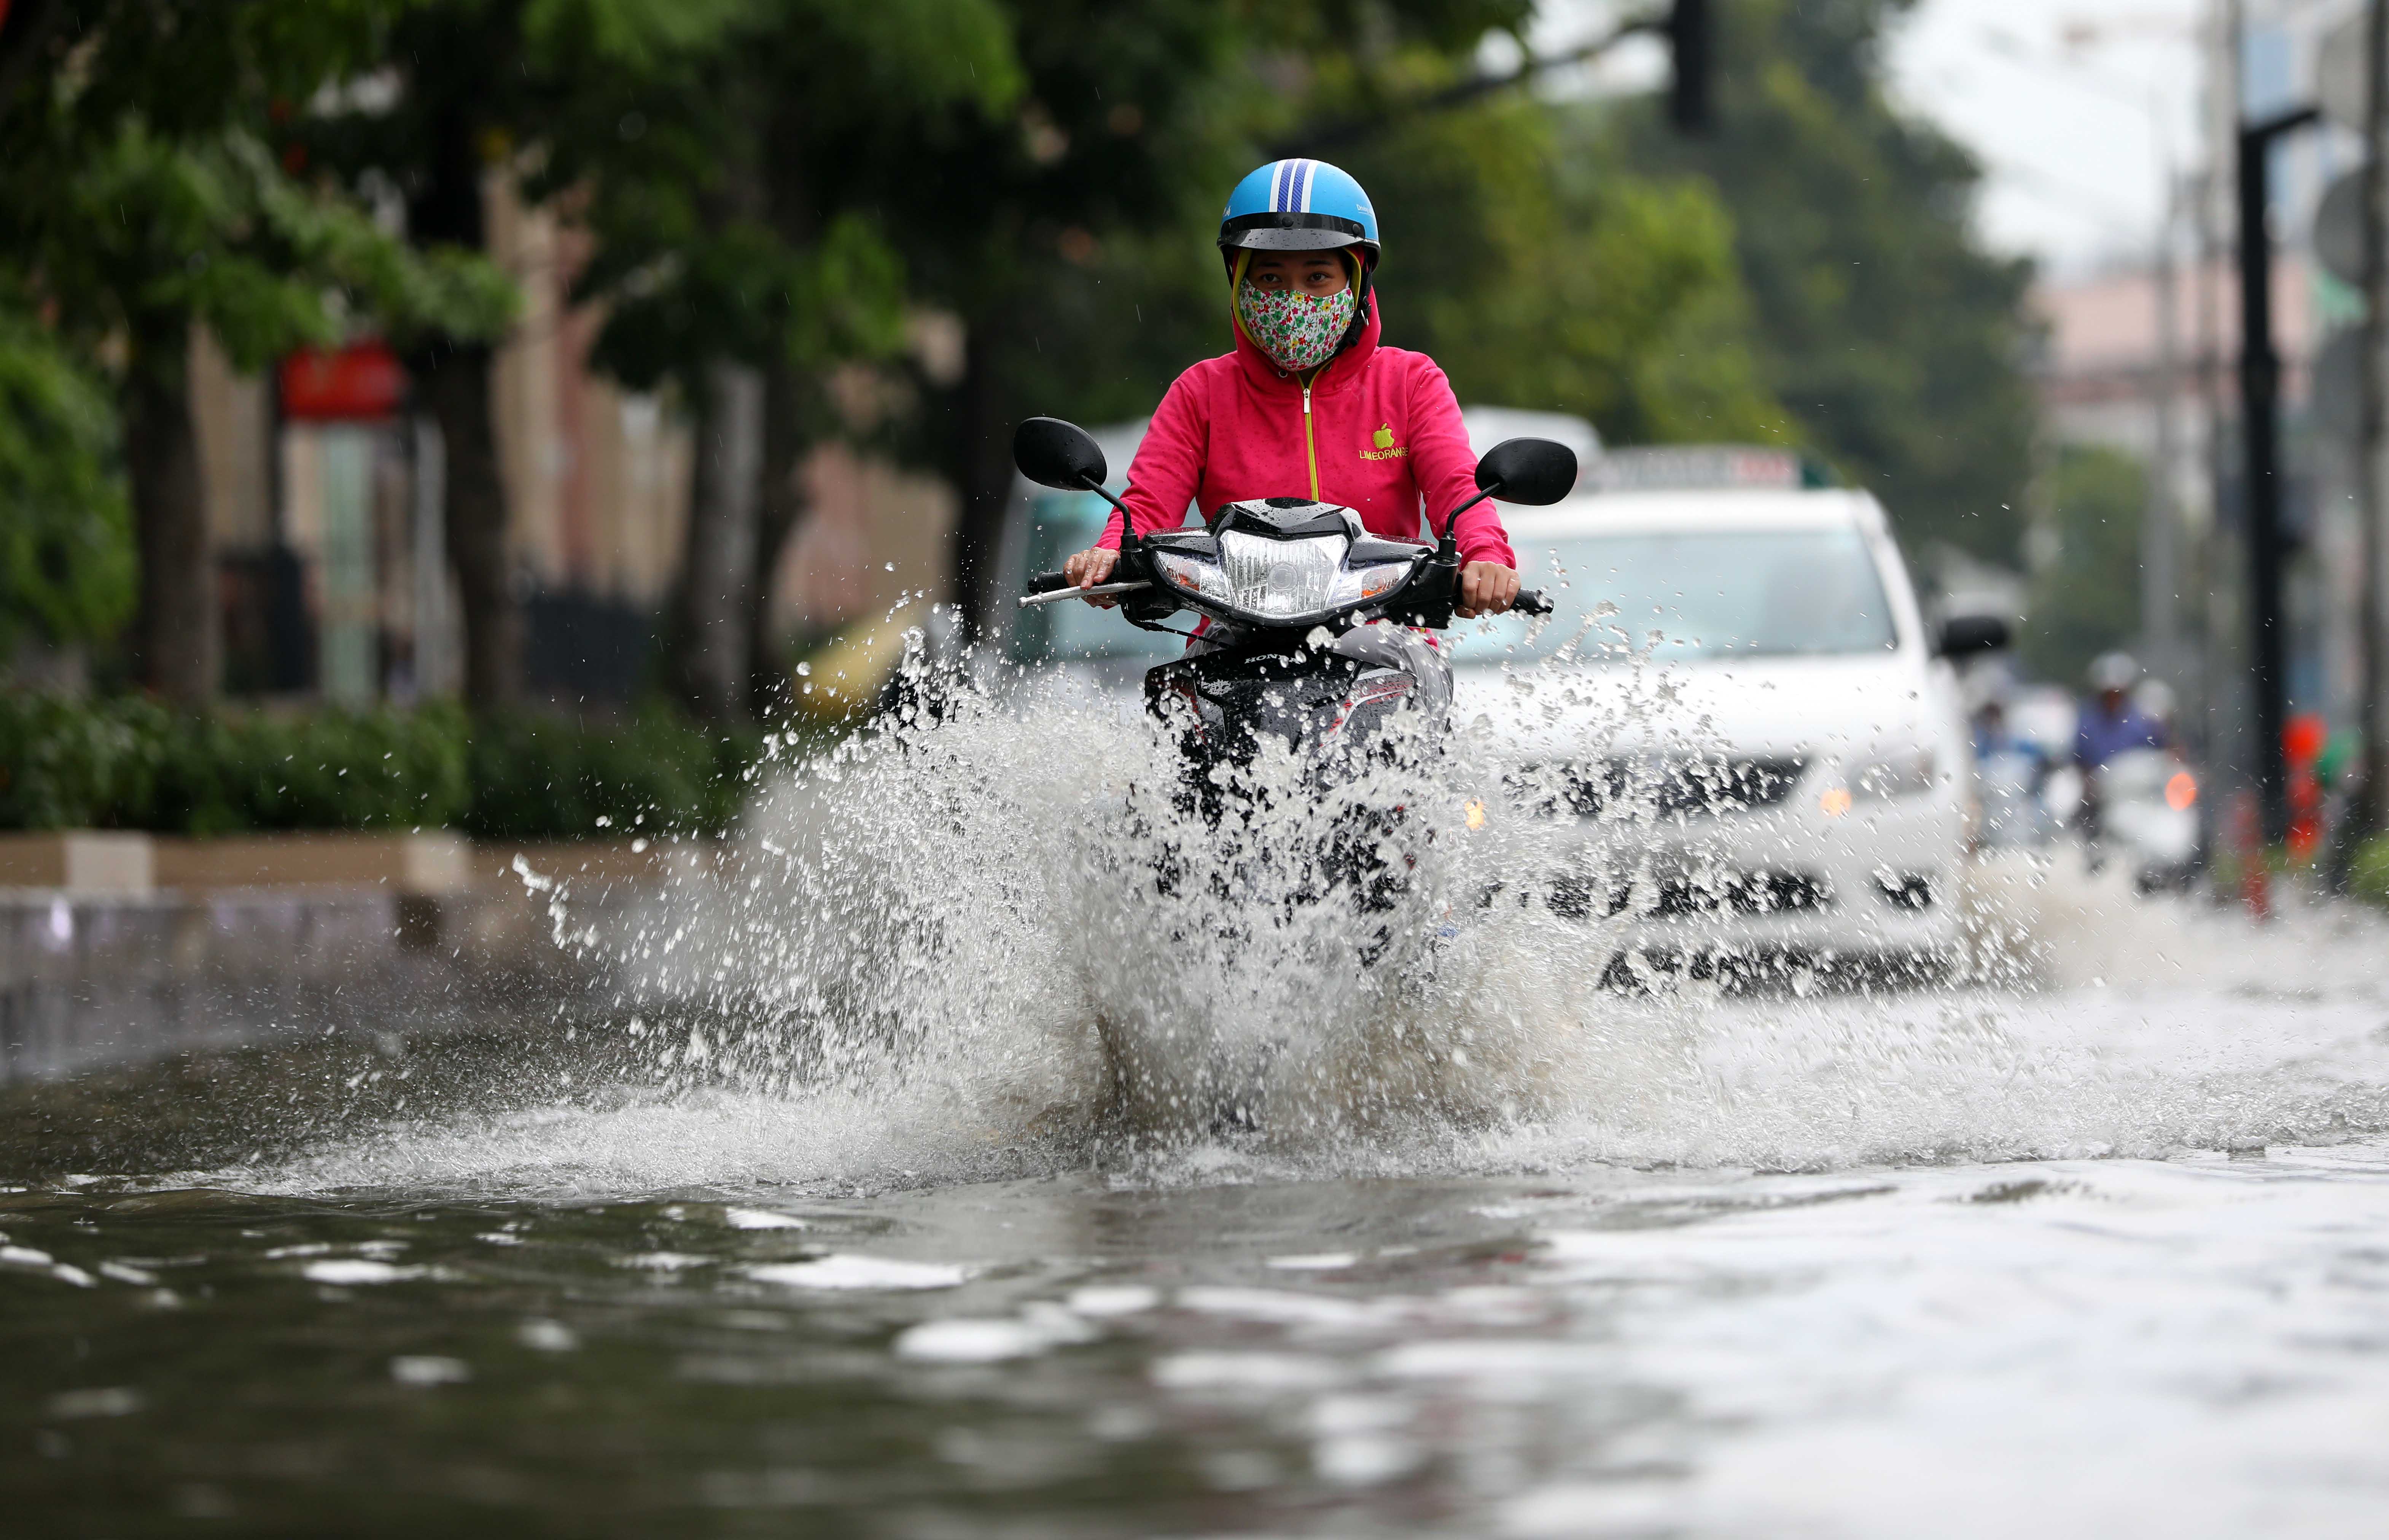 A woman rides her motorcycle through the flooded street.